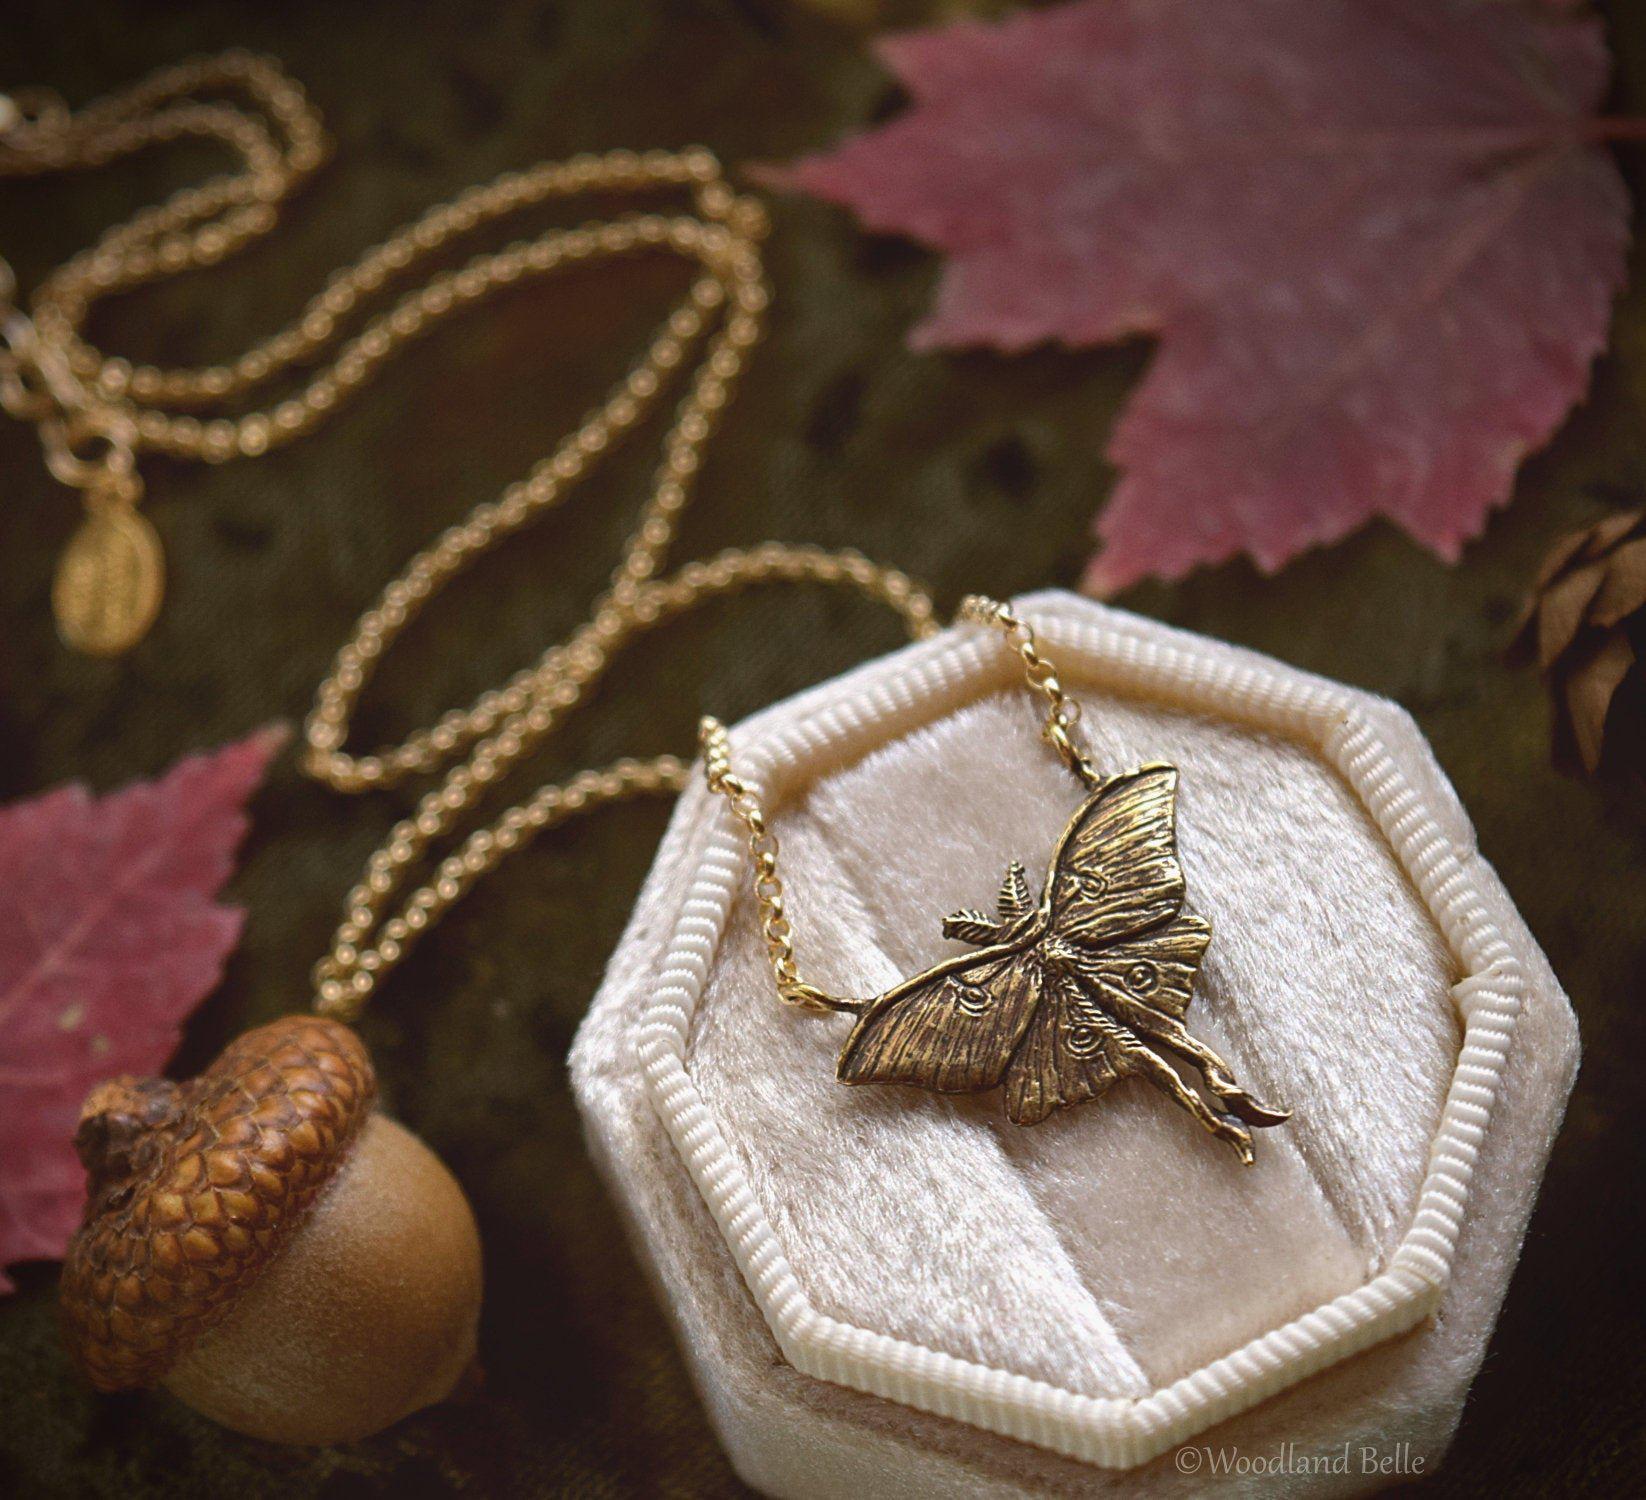 Luna Moth Necklace - Gold Bronze Moon Moth Pendant - Small, Dainty Luna Moth Charm - Jewelry Gift for Moth Lover - by Woodland Belle